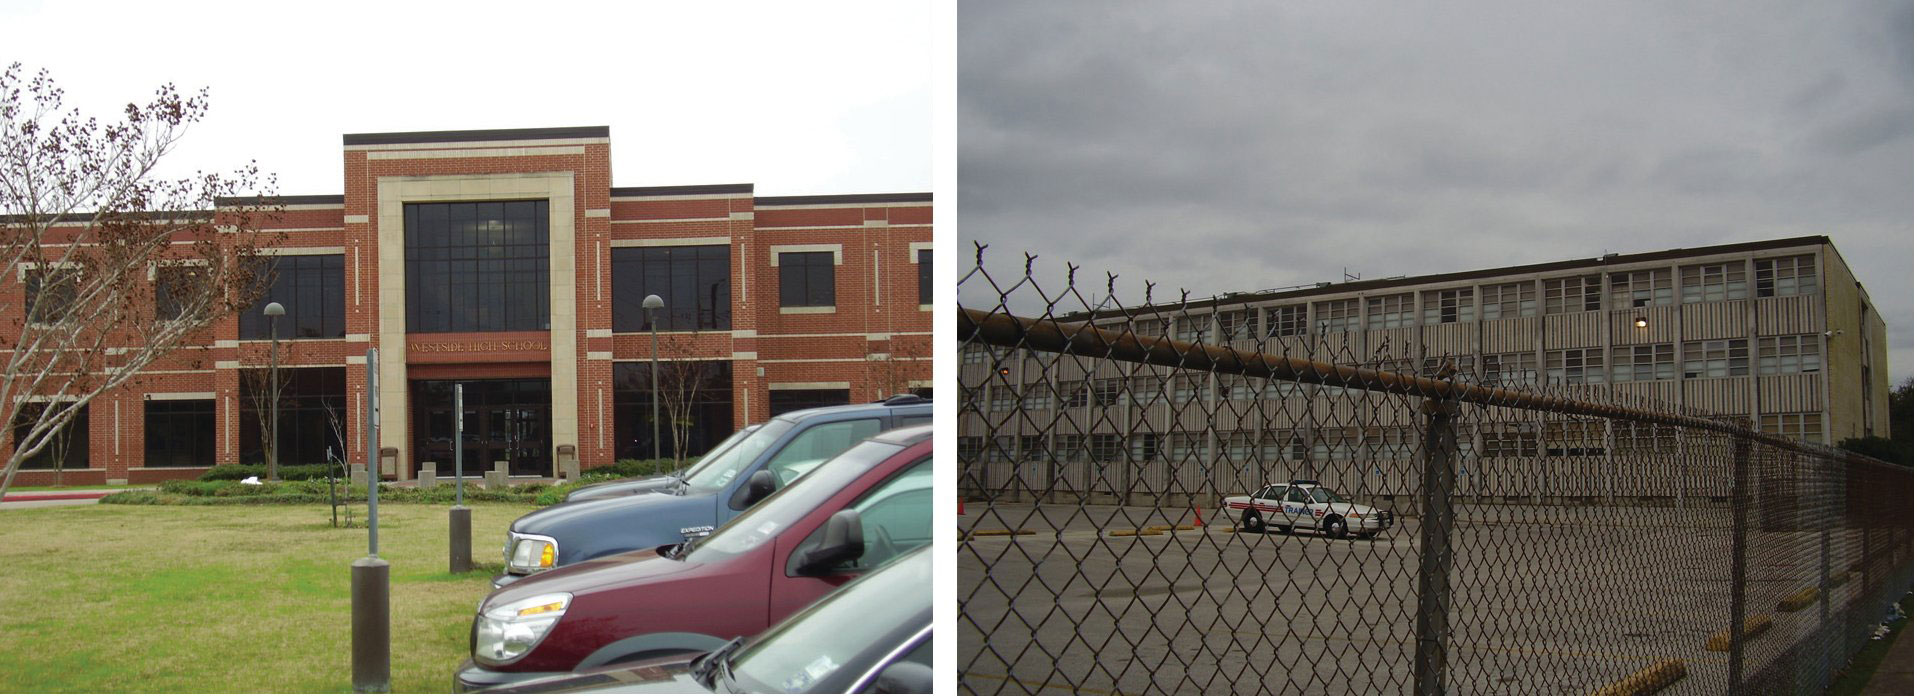 Two photos of two schools. The one on the left looks very new and clean, and has a bright green lawn in front. The school on the left is old and dilapidated, has a vast empty parking lot and is surrounded by a chain-link fence.